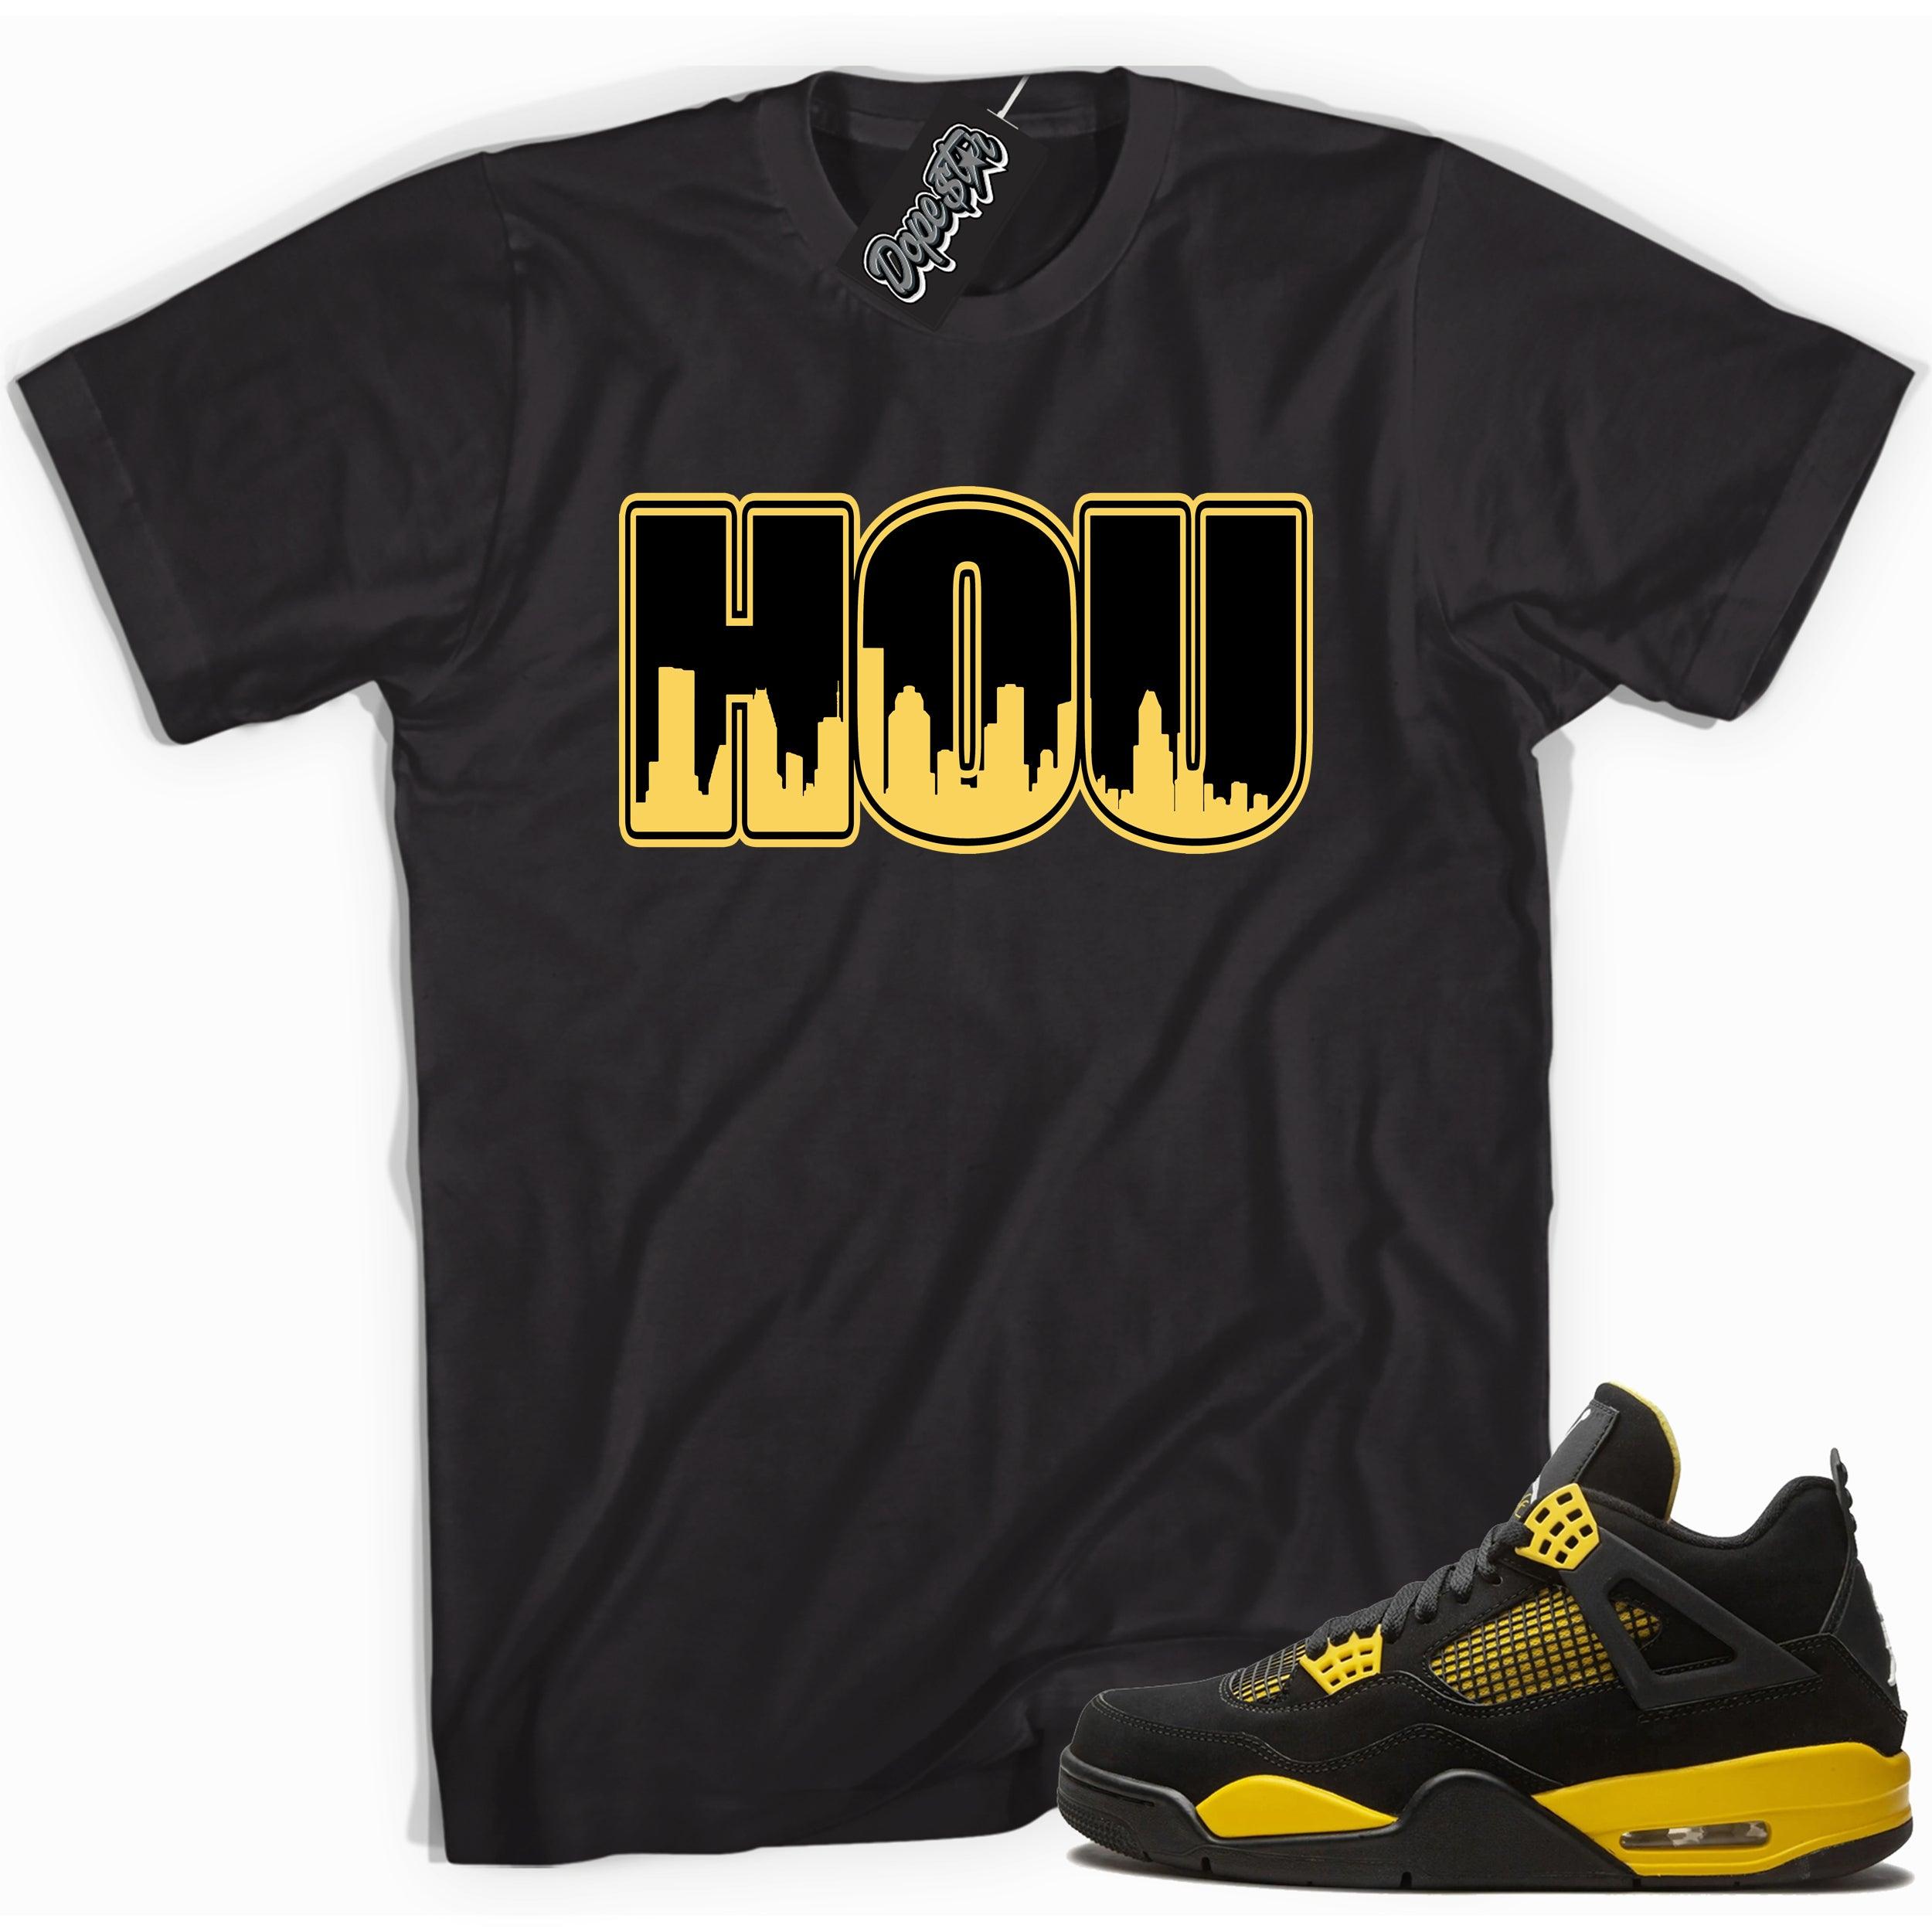 Cool black graphic tee with 'HOU' print, that perfectly matches  Air Jordan 4 Thunder sneakers